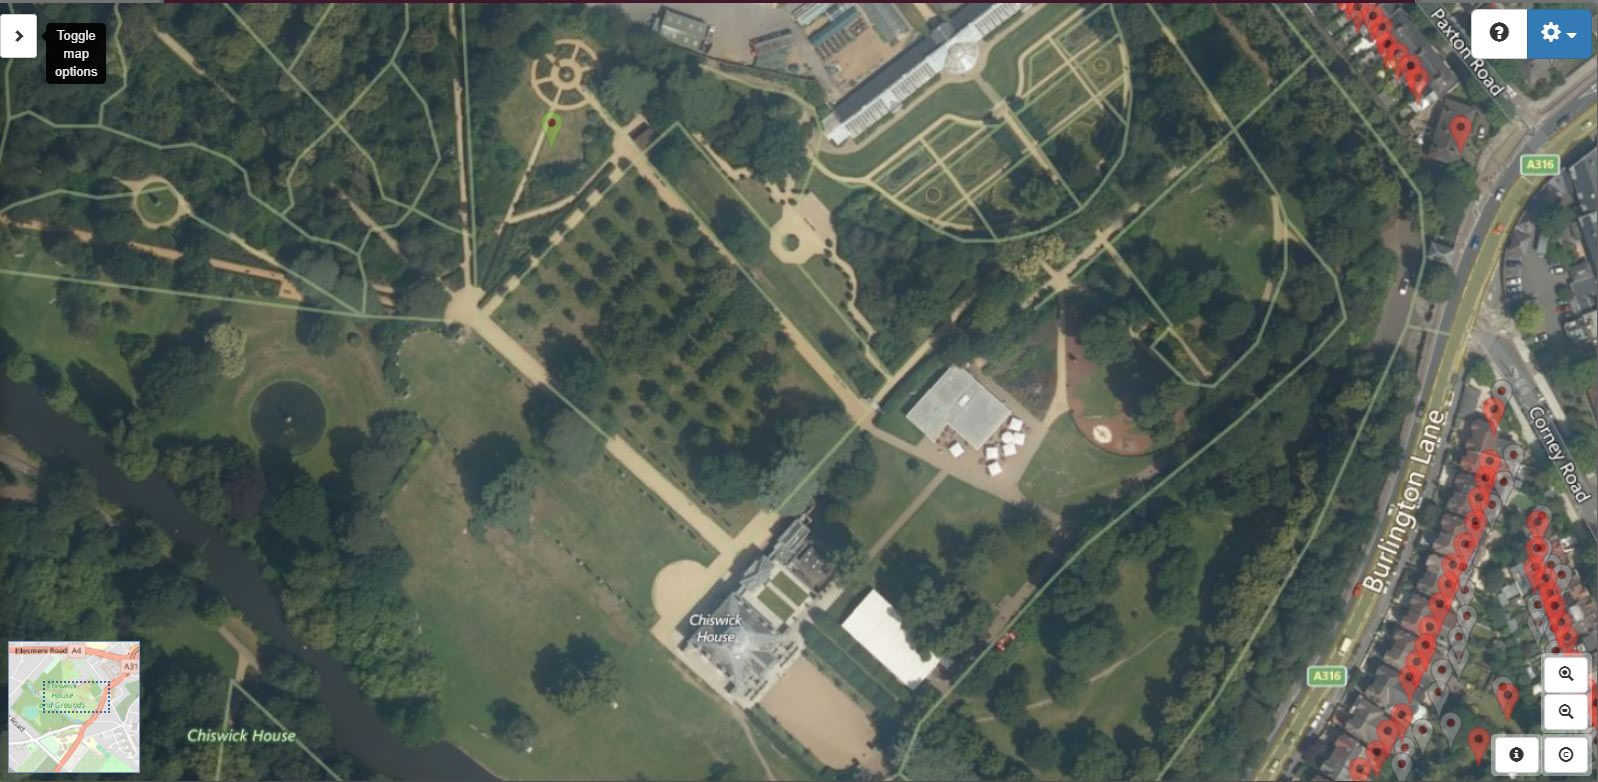 Chiswick House on Bing Hybrid map shows house today minus wings that were demolished in 1950s